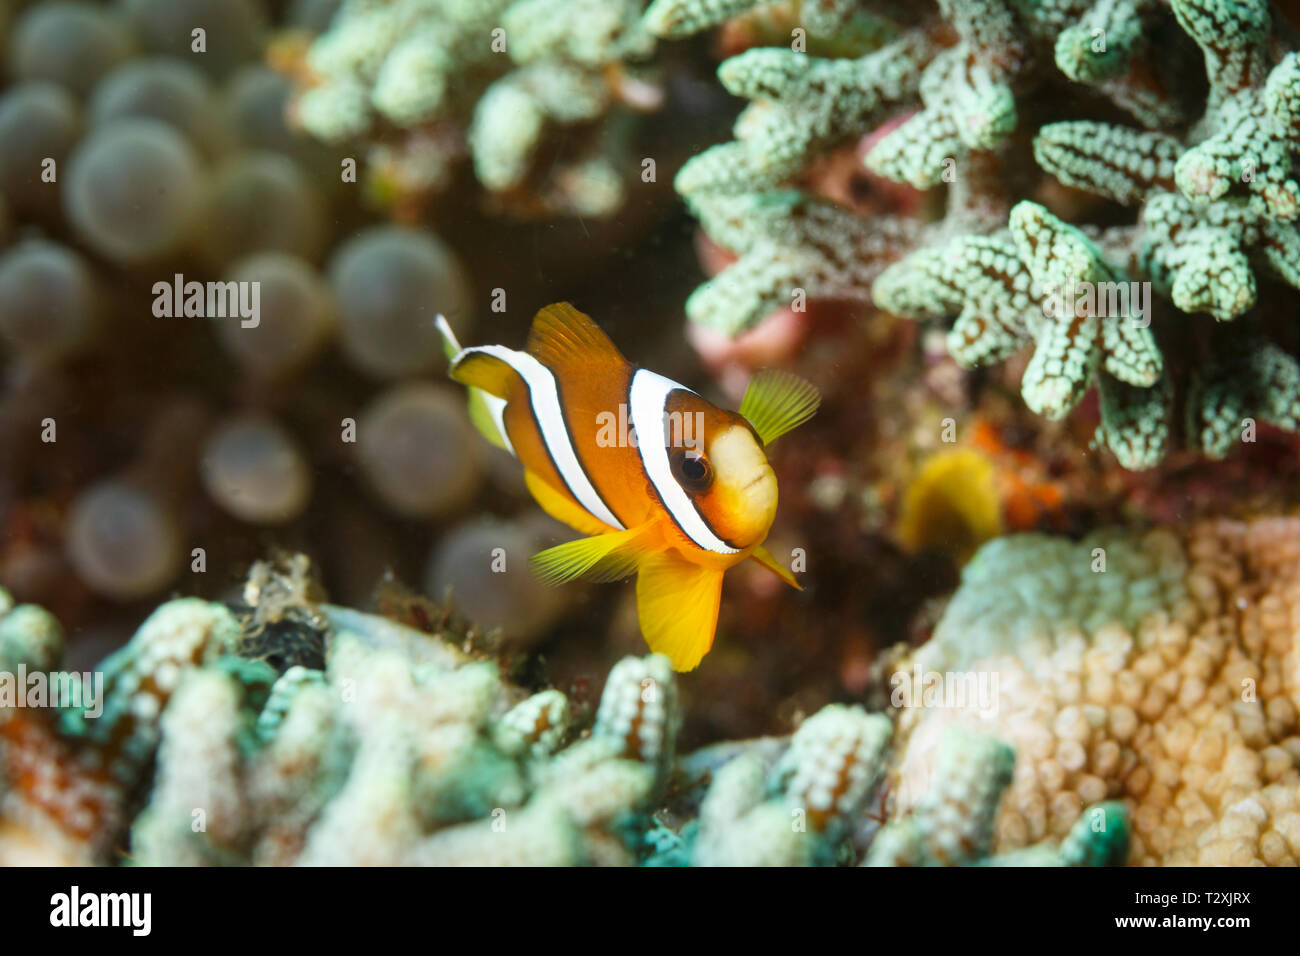 Clown anemonefish, Amphiprion ocellaris, hiding in staghorn coral  near bulb or Bubble Tip sea anemone Anemone, Entacmaea quadricolor,  with round bul Stock Photo